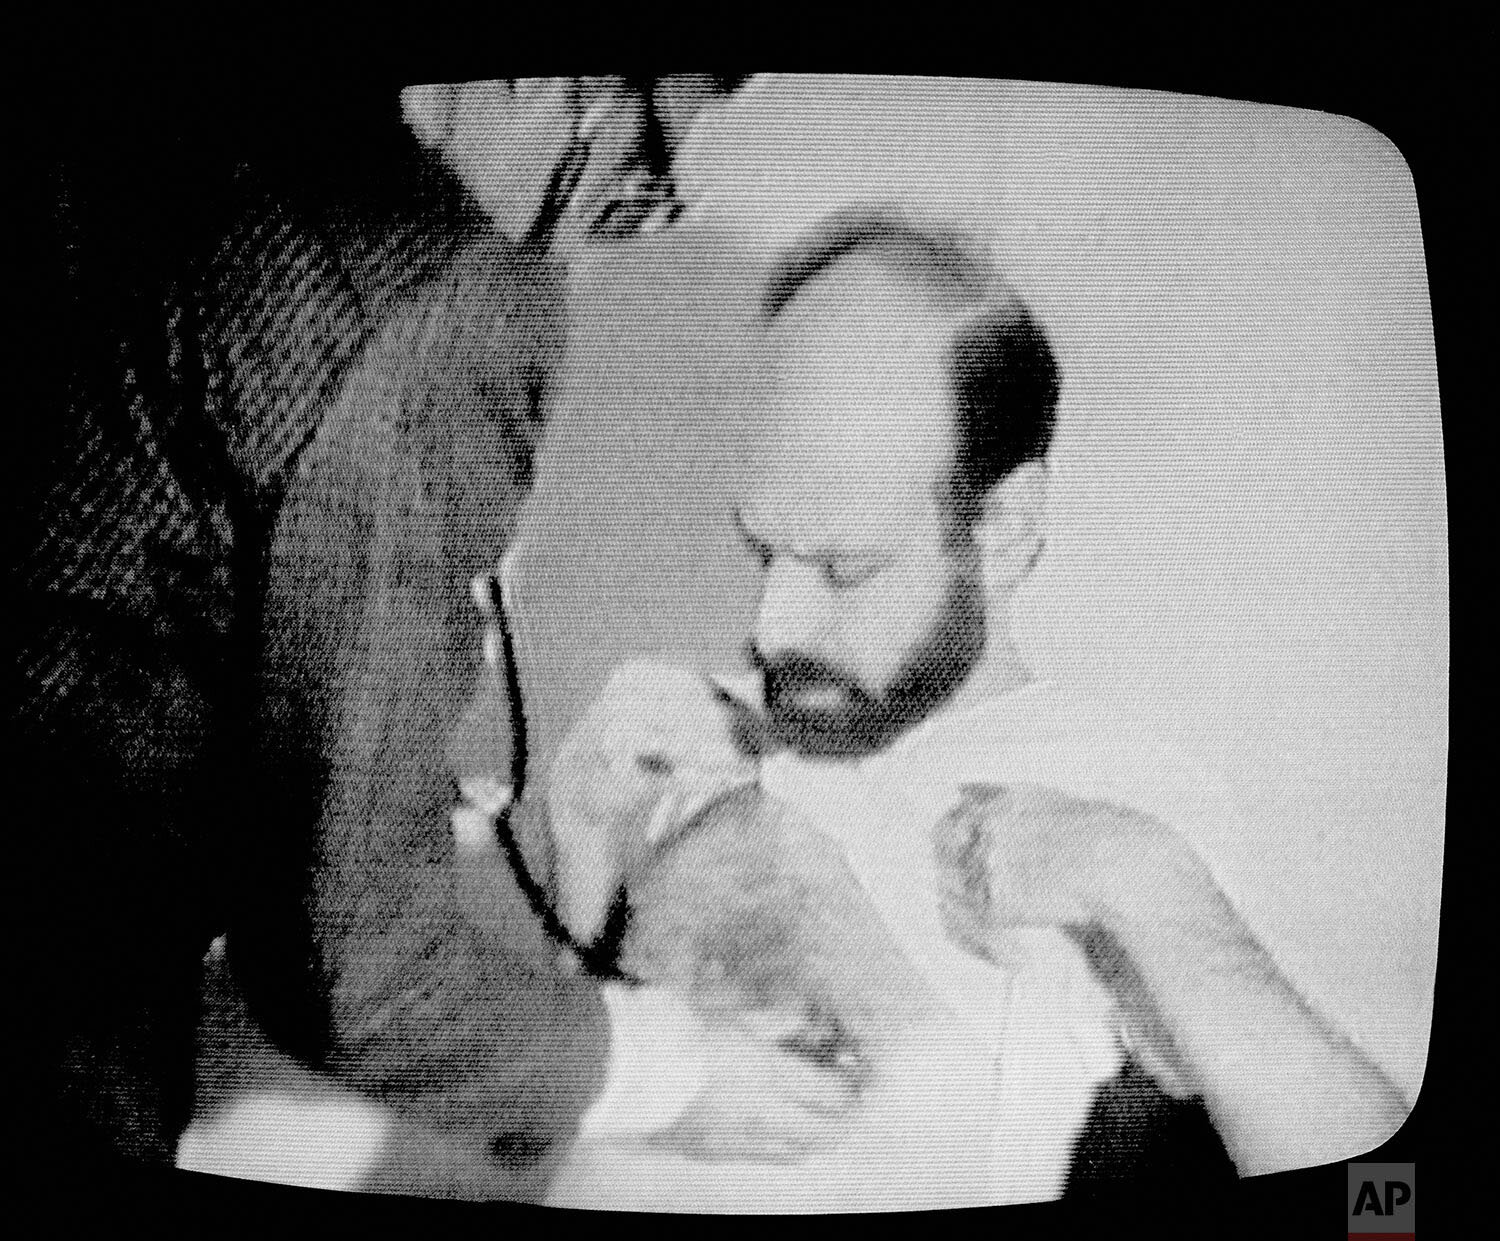  Barry Rosen, one of the American hostages being held in Iran, is shown on a video screen being treated by an Iranian Red Crescent doctor in the occupied U.S. Embassy in this film shot by the militants holding the hostages, March, 1980.  The video wa